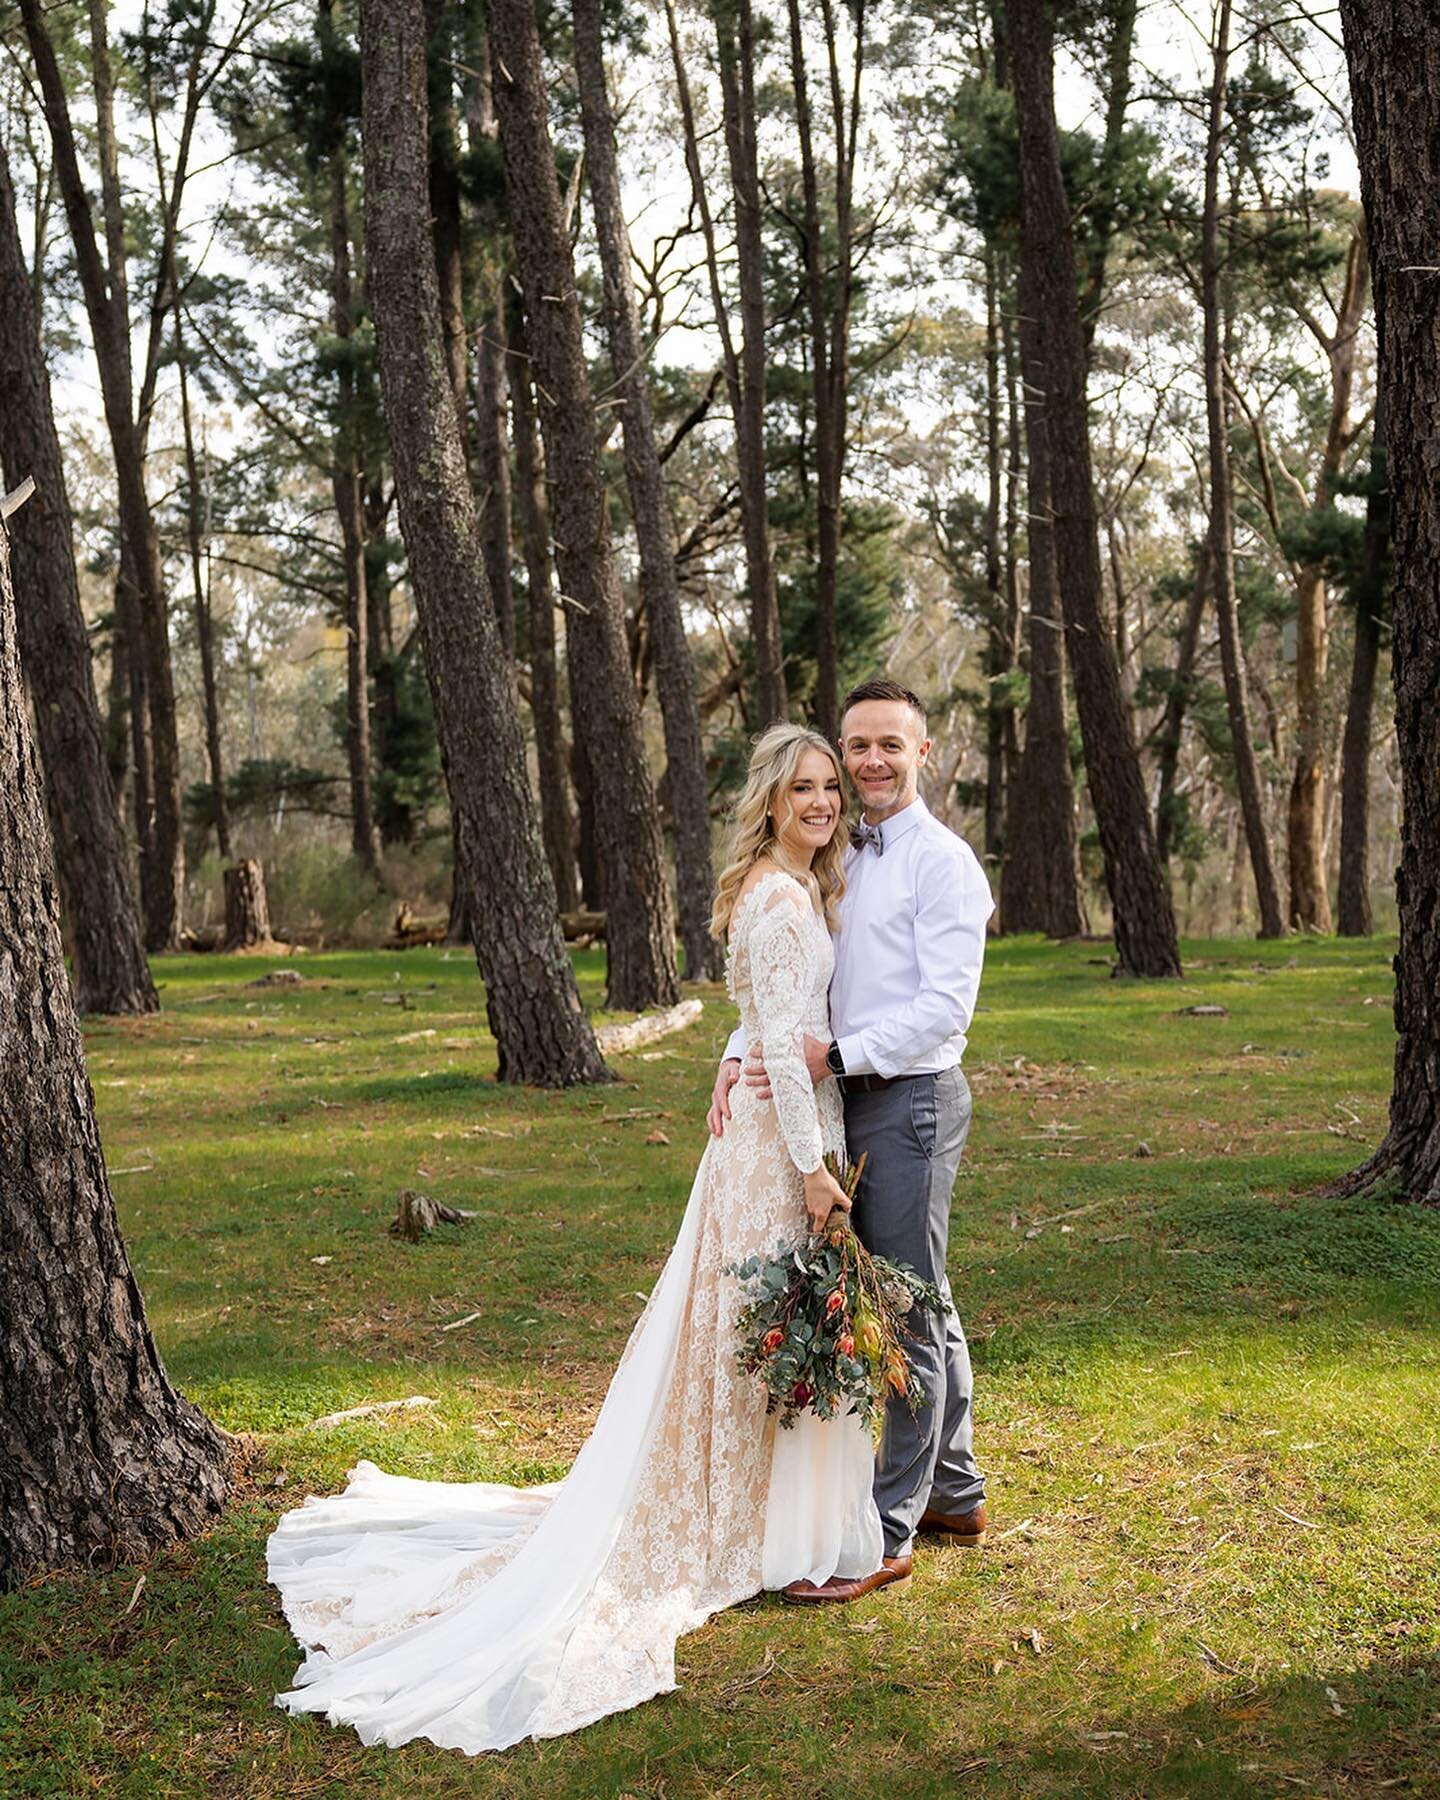 Ashlie &amp; Luke found a magical spot in the pine trees to get married in. It felt so intimate and special to be there with them 😘